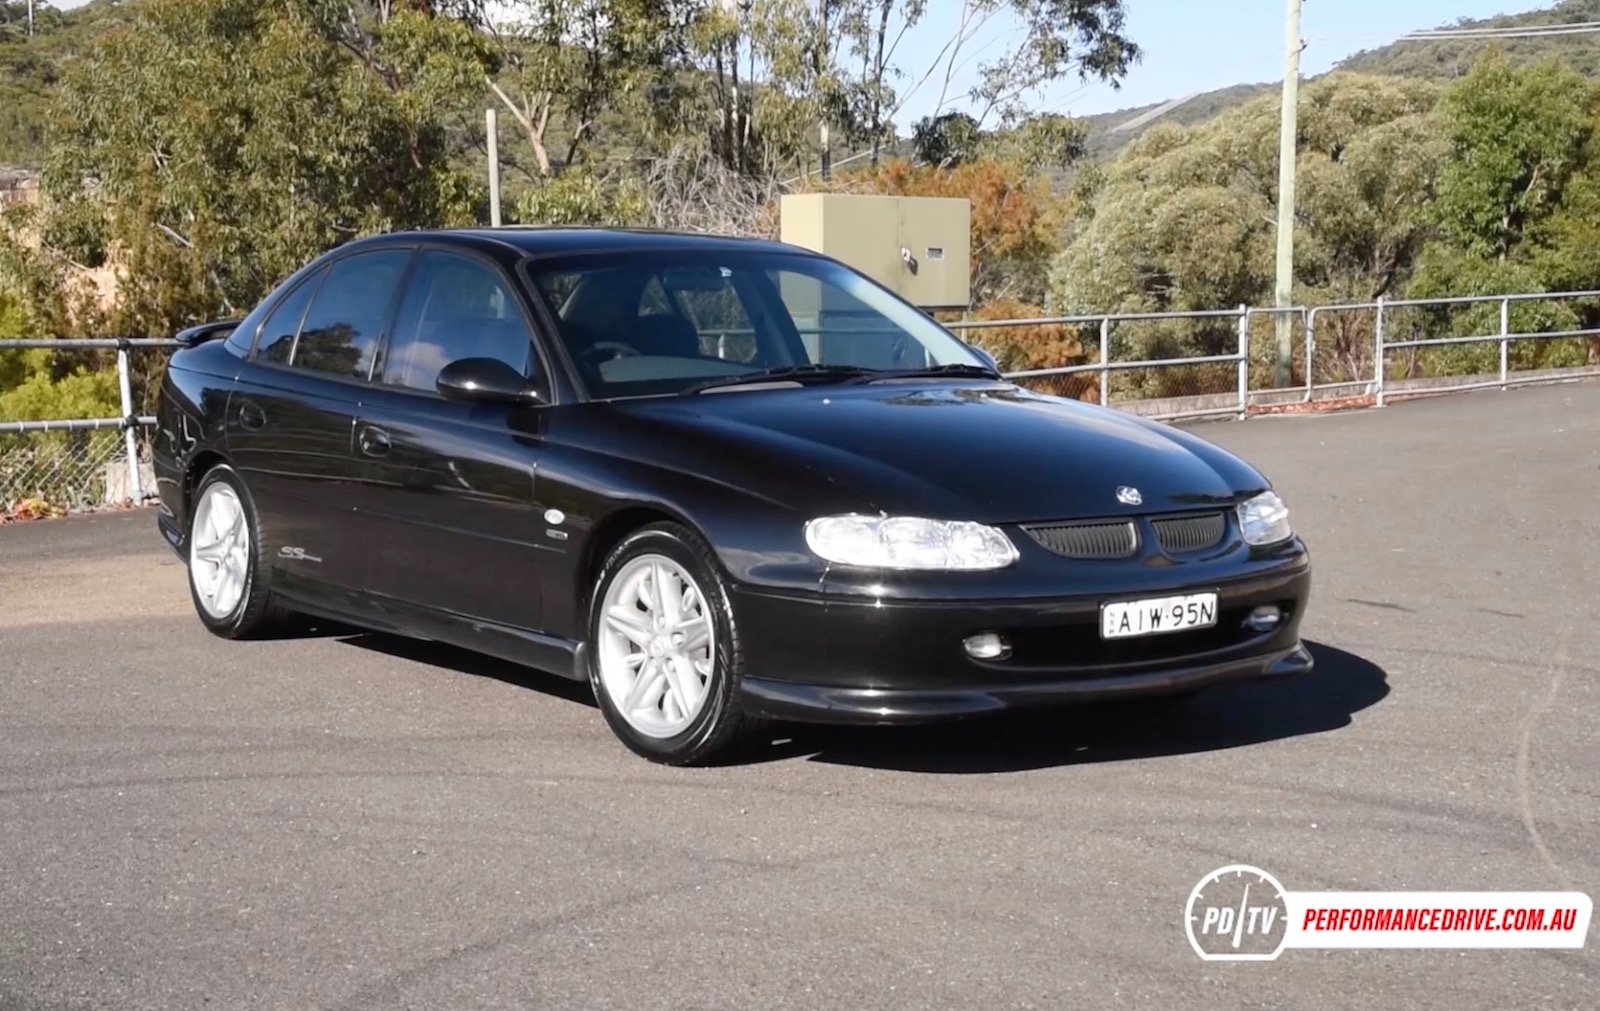 Video: 2000 Holden VT Commodore SS Series II 0-100km/h & engine sound